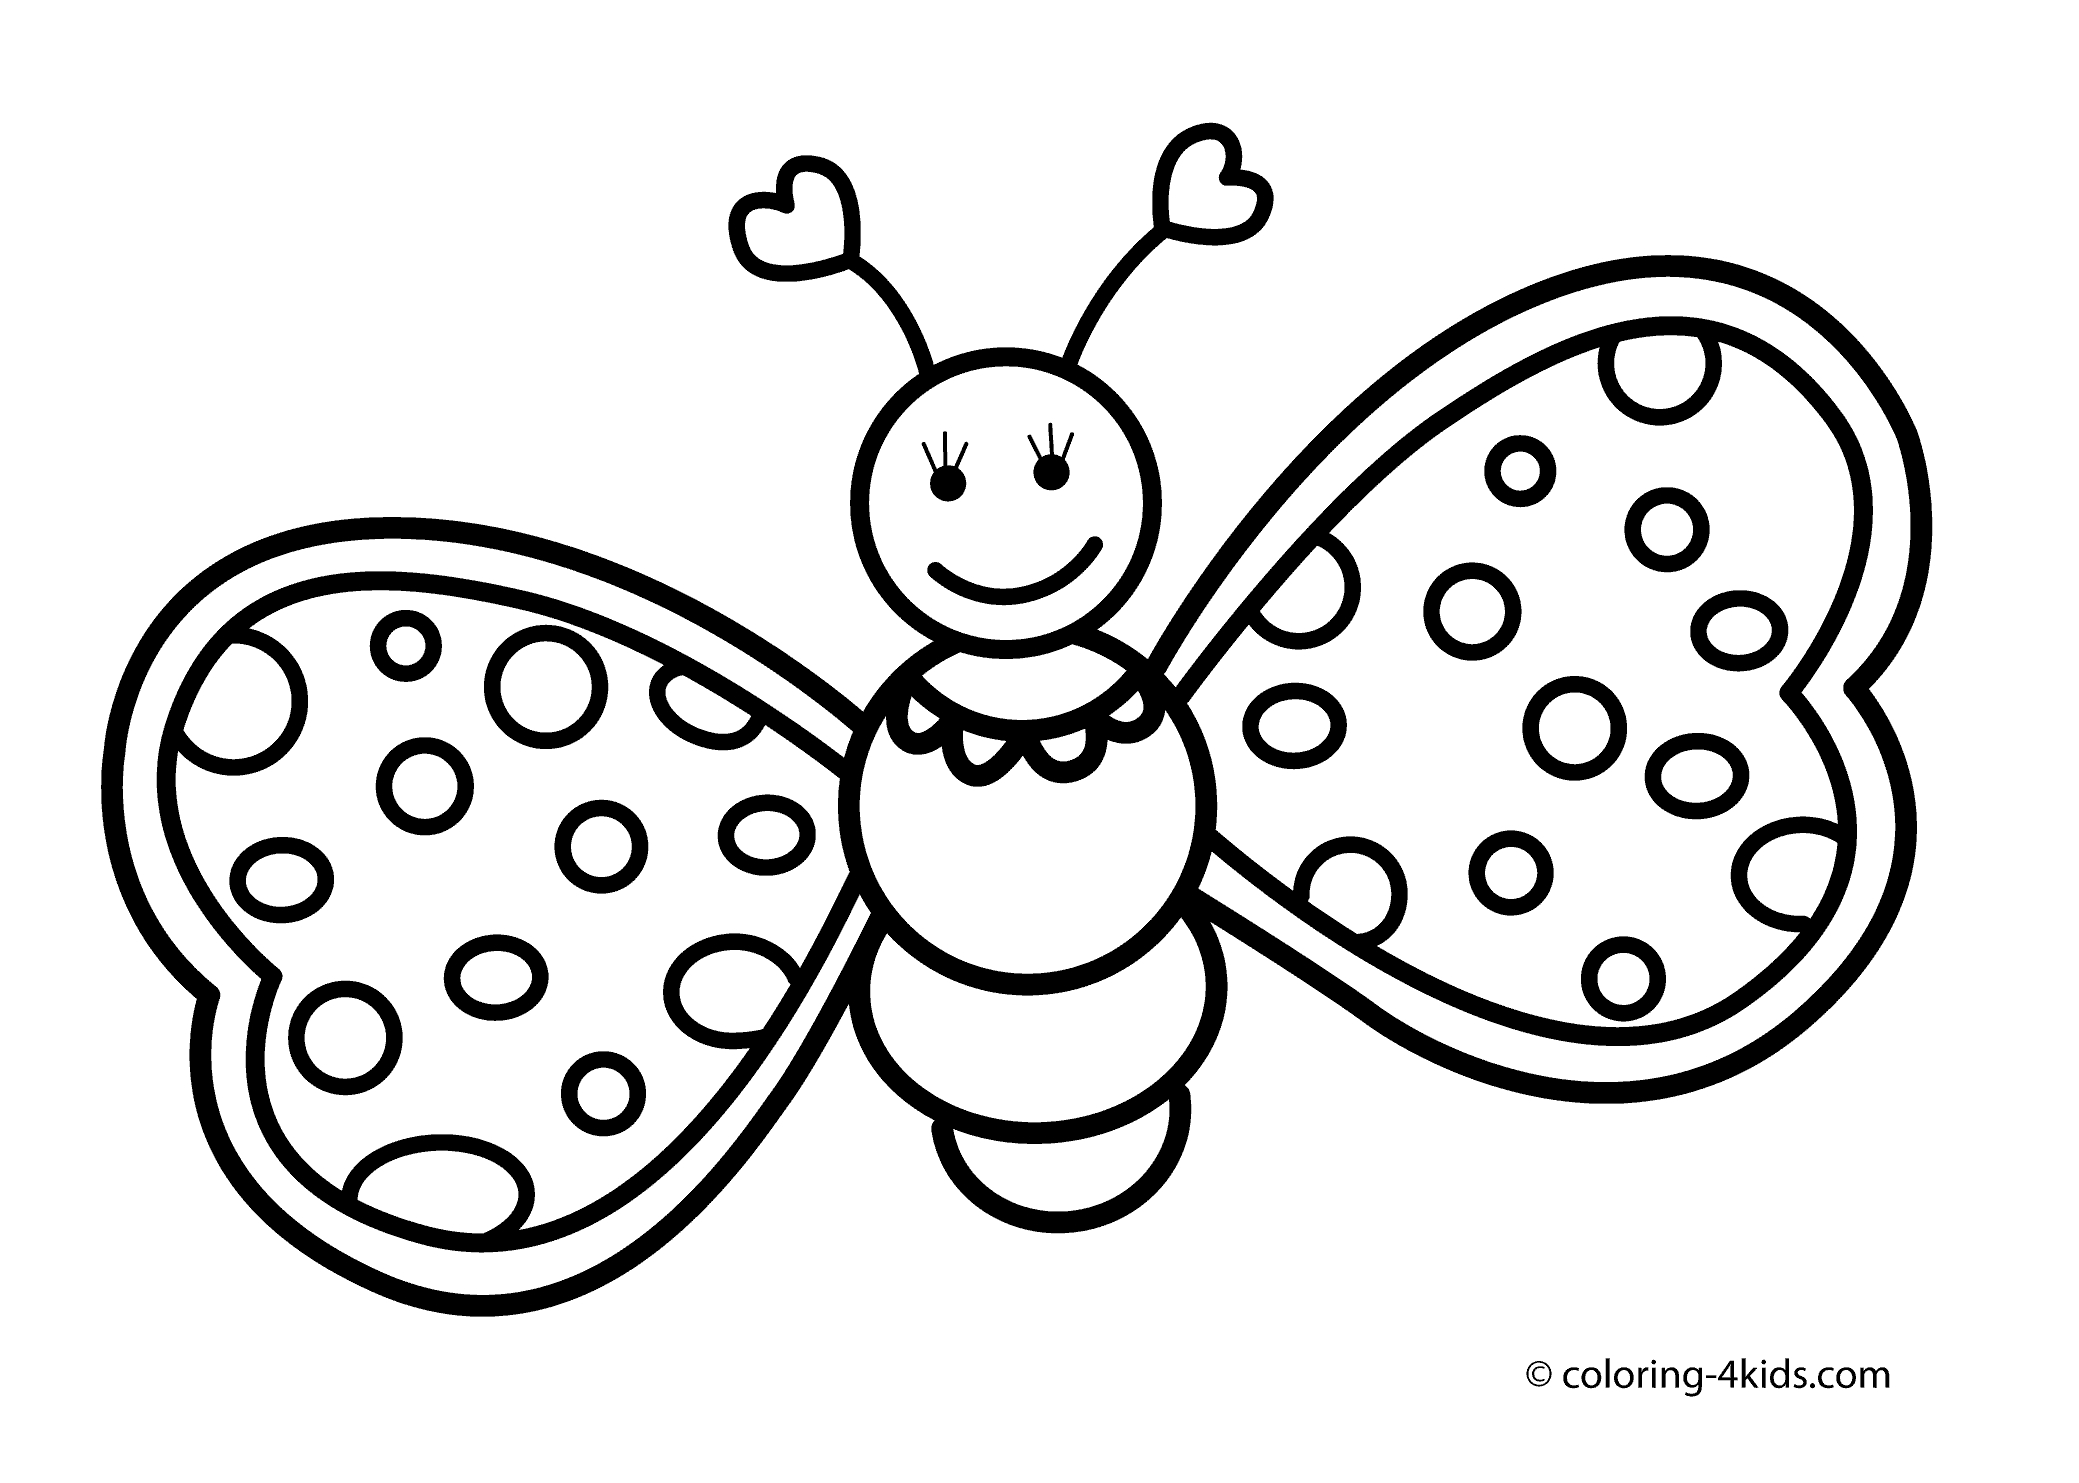 Cartoon Butterflies Coloring Pages Free Pic Of Butterfly Simple In Black N White For Colouring For